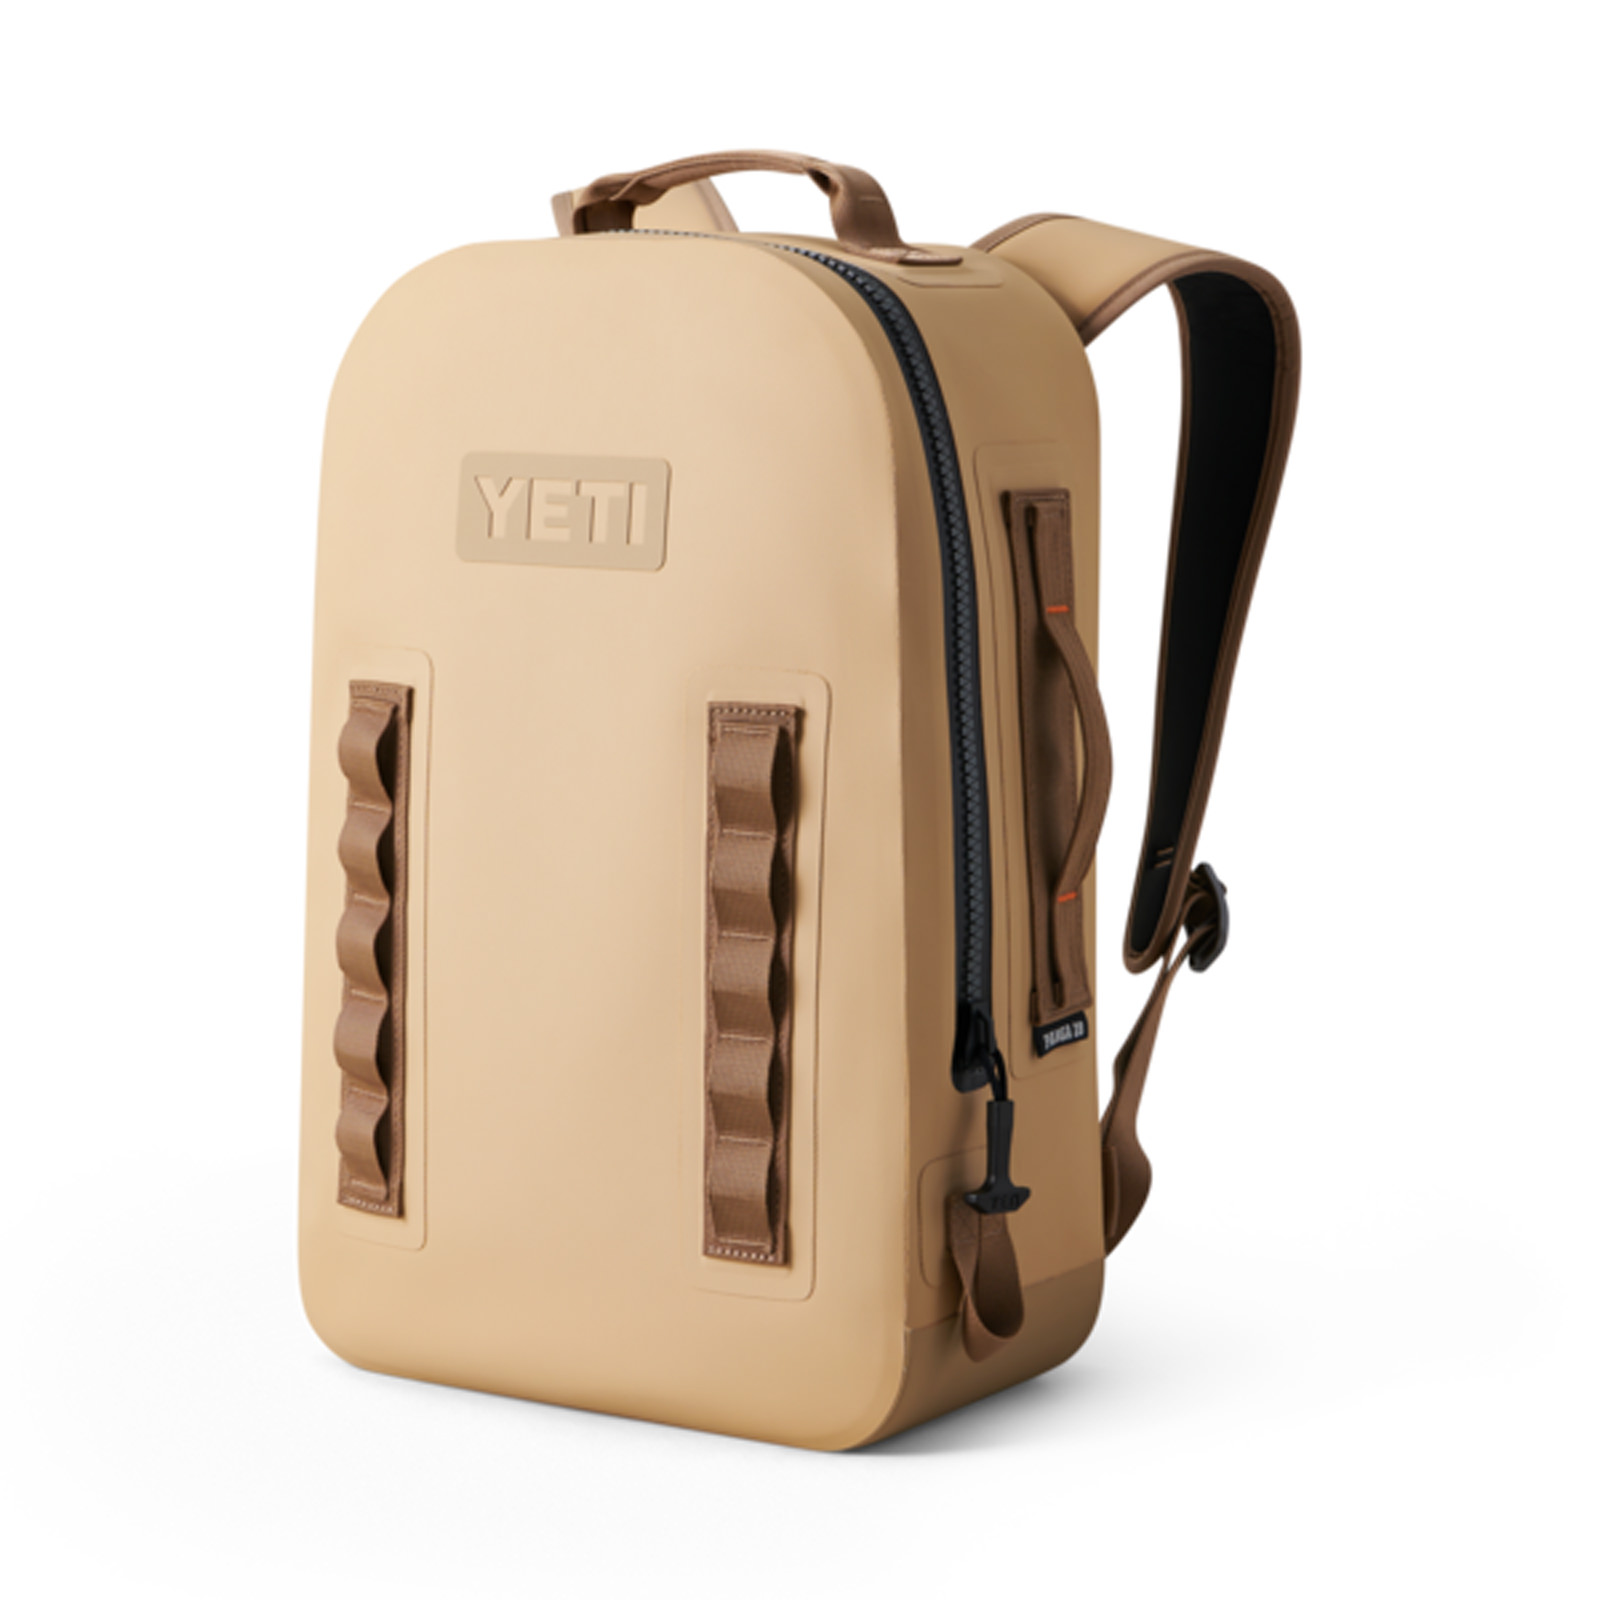 Seeking adventure then this Yeti Panga backpack is 100% for you! Completely  waterproof, this backpack can tackle anything 🏕️